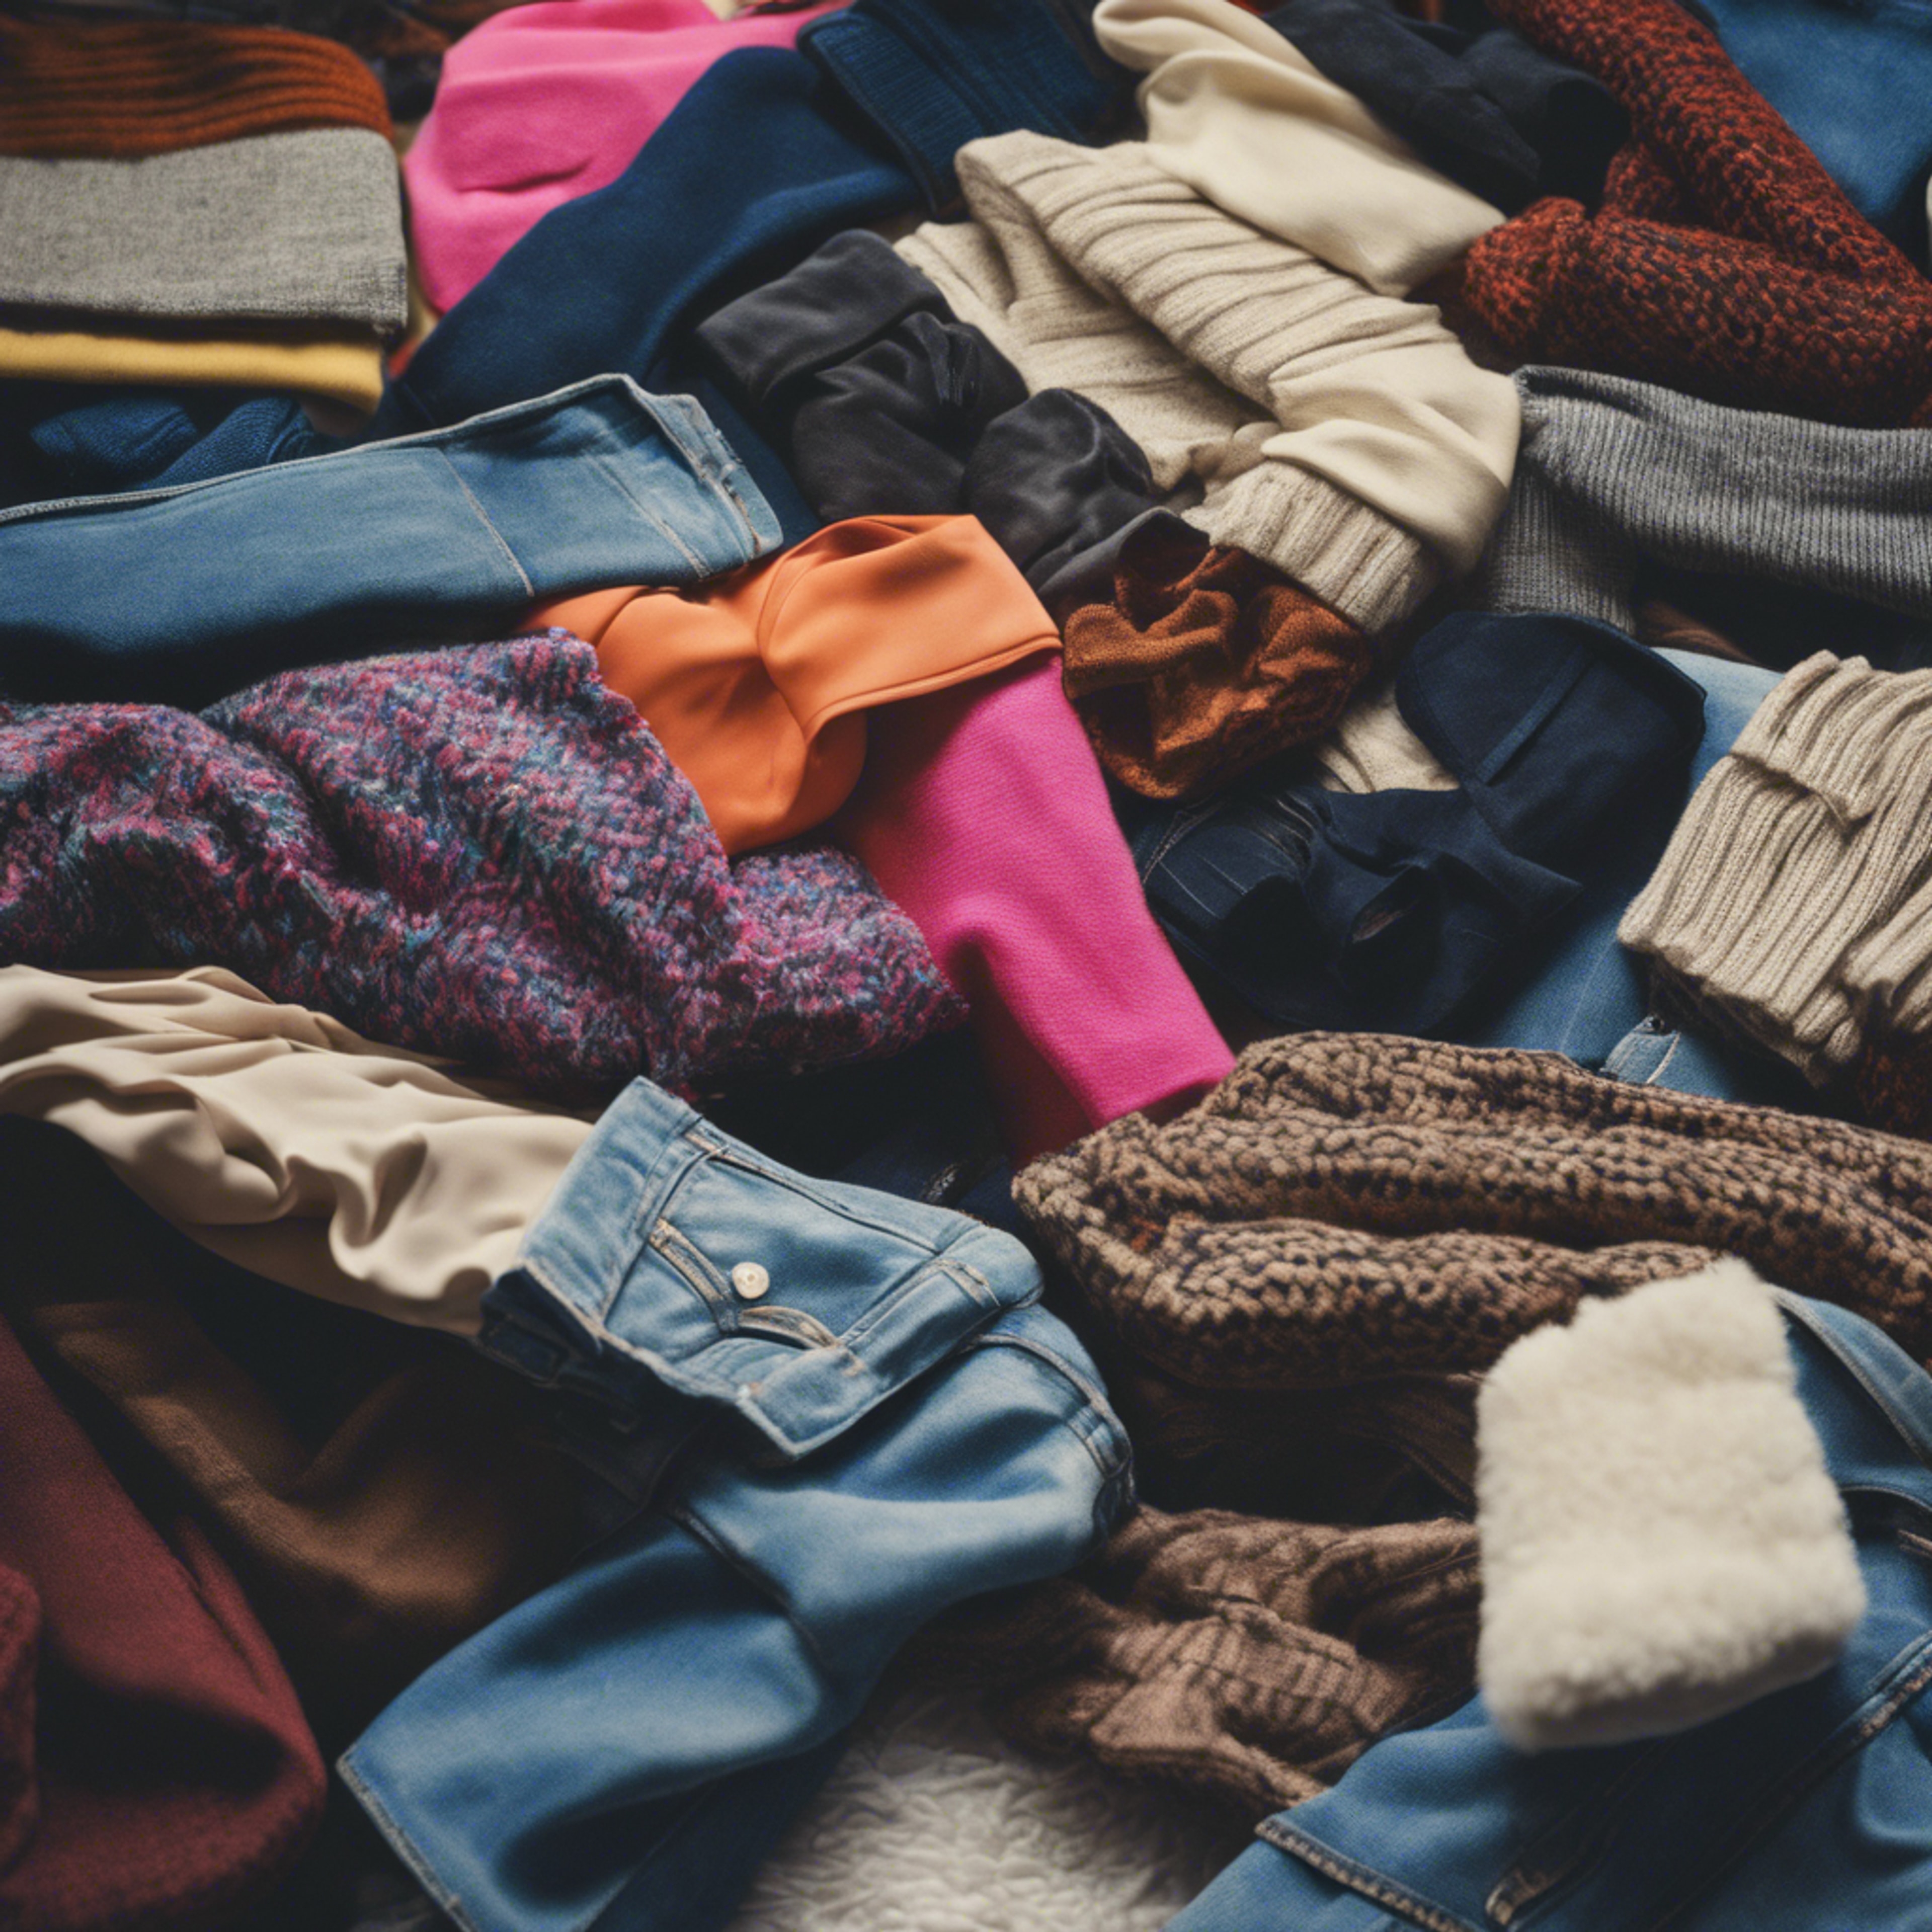 A pile of iconic 80s fashions such as leg warmers, oversized blazers, and high-waisted jeans. Шпалери[dbd69f645b7844d6a4c4]